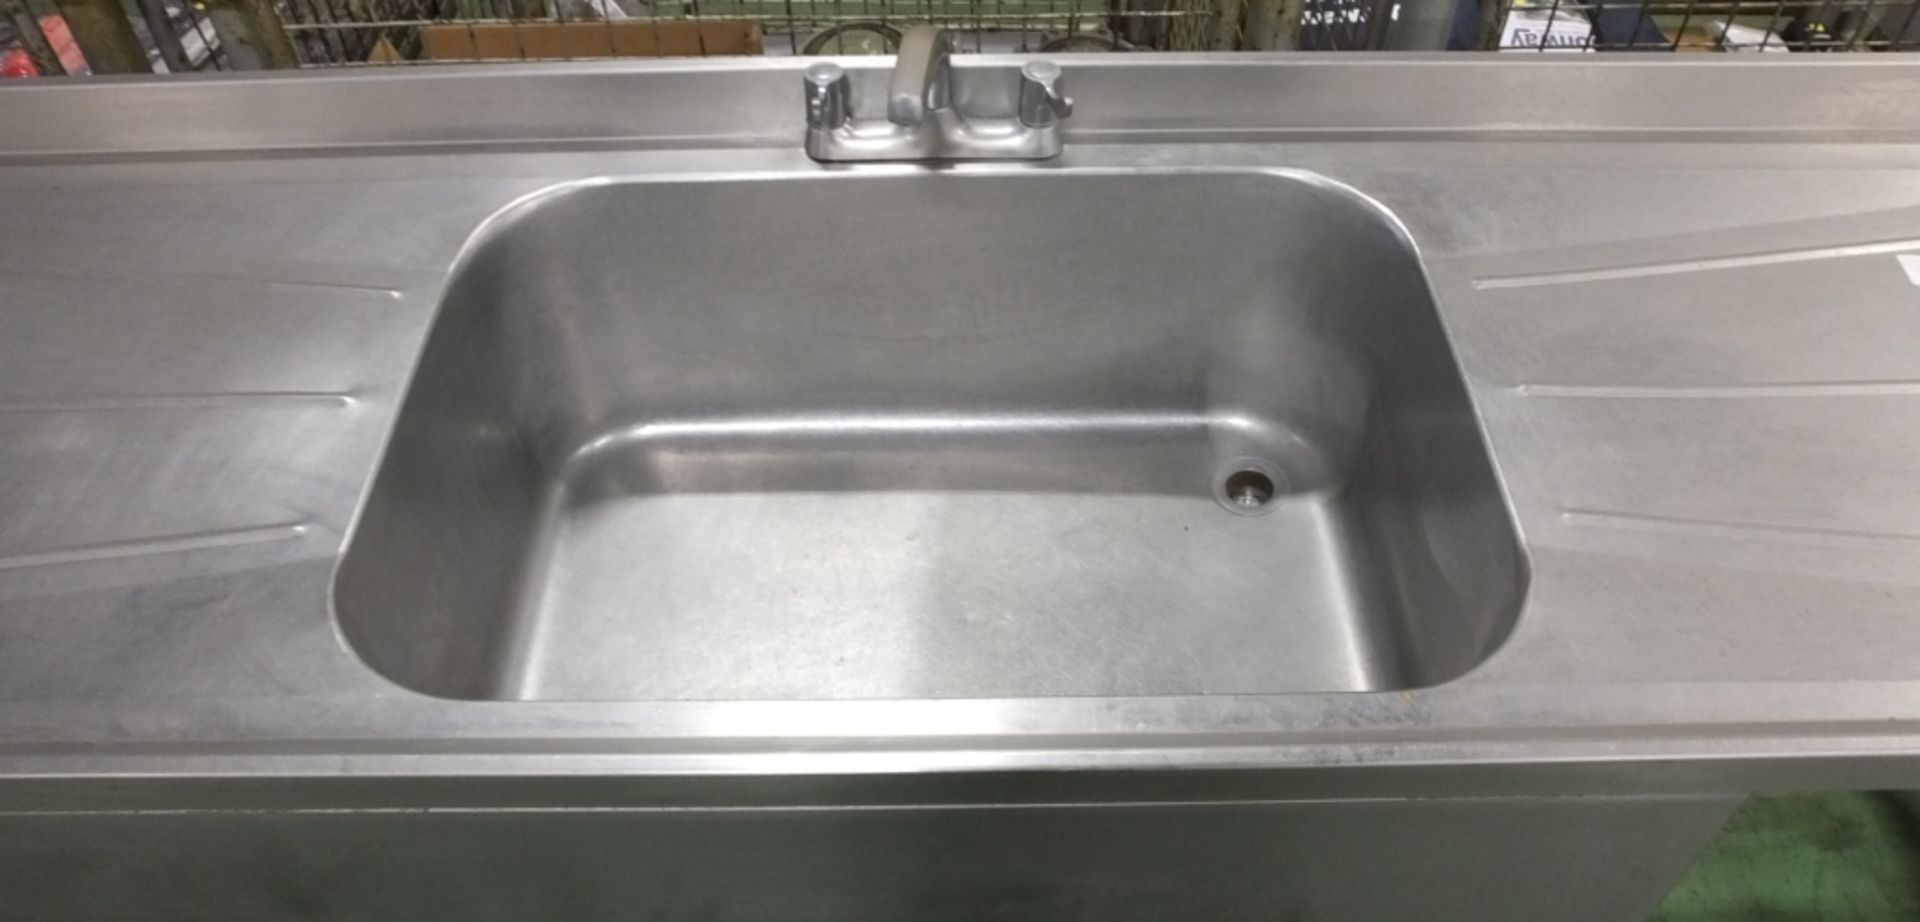 Single Sink Unit Stainless Steel L2300 x W650 x H940mm - Image 2 of 2